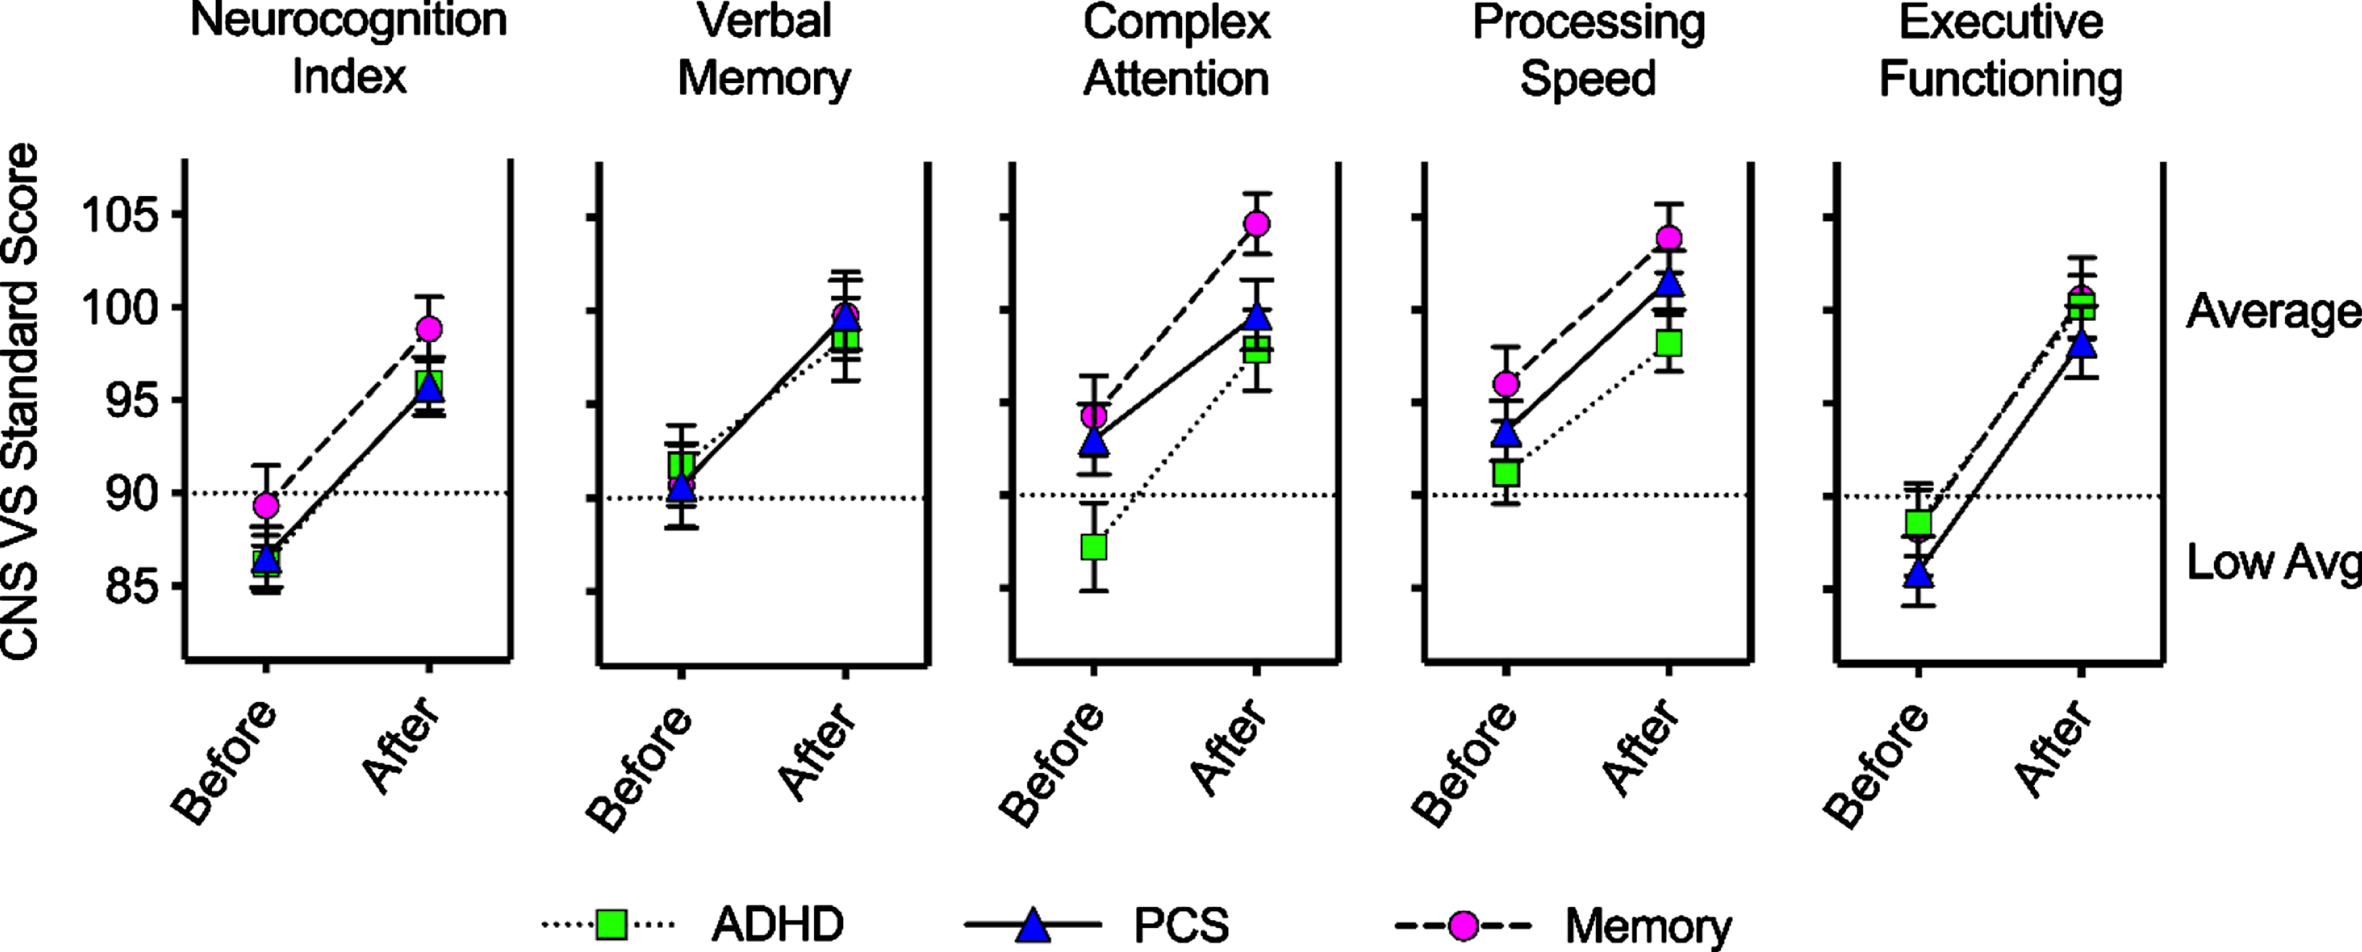 Mean CNS VS domain scores before and after treatment. For patients in the ADHD, PCS, and memory diagnosis groups, mean test scores are shown before and after the brain fitness program (error bars are standard error of the mean). For all these domains, an increase in score indicates improvement. In all cases except for the ADHD group Verbal Memory domain, the mean change in score from pre- to post-program (Table 2) was a significant increase (improvement).